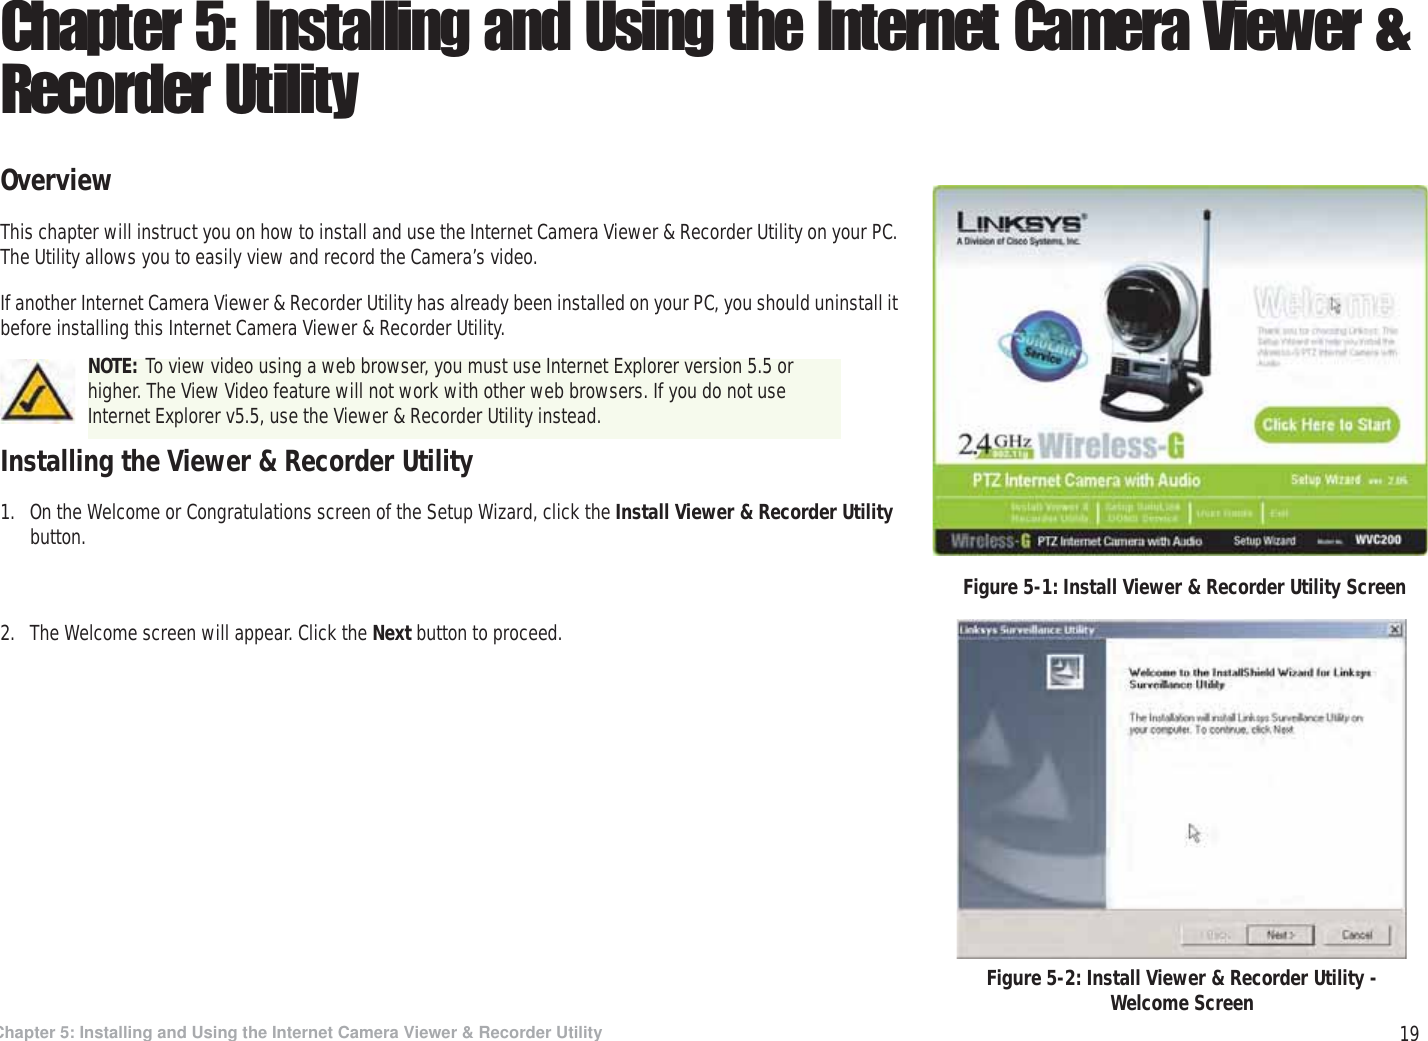 19Chapter 5: Installing and Using the Internet Camera Viewer &amp; Recorder UtilityOverviewWireless-G PTZ Internet Camera with AudioChapter 5: Installing and Using the Internet Camera Viewer &amp; Recorder UtilityOverviewThis chapter will instruct you on how to install and use the Internet Camera Viewer &amp; Recorder Utility on your PC. The Utility allows you to easily view and record the Camera’s video.If another Internet Camera Viewer &amp; Recorder Utility has already been installed on your PC, you should uninstall it before installing this Internet Camera Viewer &amp; Recorder Utility.Installing the Viewer &amp; Recorder Utility1. On the Welcome or Congratulations screen of the Setup Wizard, click the Install Viewer &amp; Recorder Utility button.2. The Welcome screen will appear. Click the Next button to proceed.Figure 5-1: Install Viewer &amp; Recorder Utility ScreenFigure 5-2: Install Viewer &amp; Recorder Utility - Welcome ScreenNOTE: To view video using a web browser, you must use Internet Explorer version 5.5 or higher. The View Video feature will not work with other web browsers. If you do not use Internet Explorer v5.5, use the Viewer &amp; Recorder Utility instead.